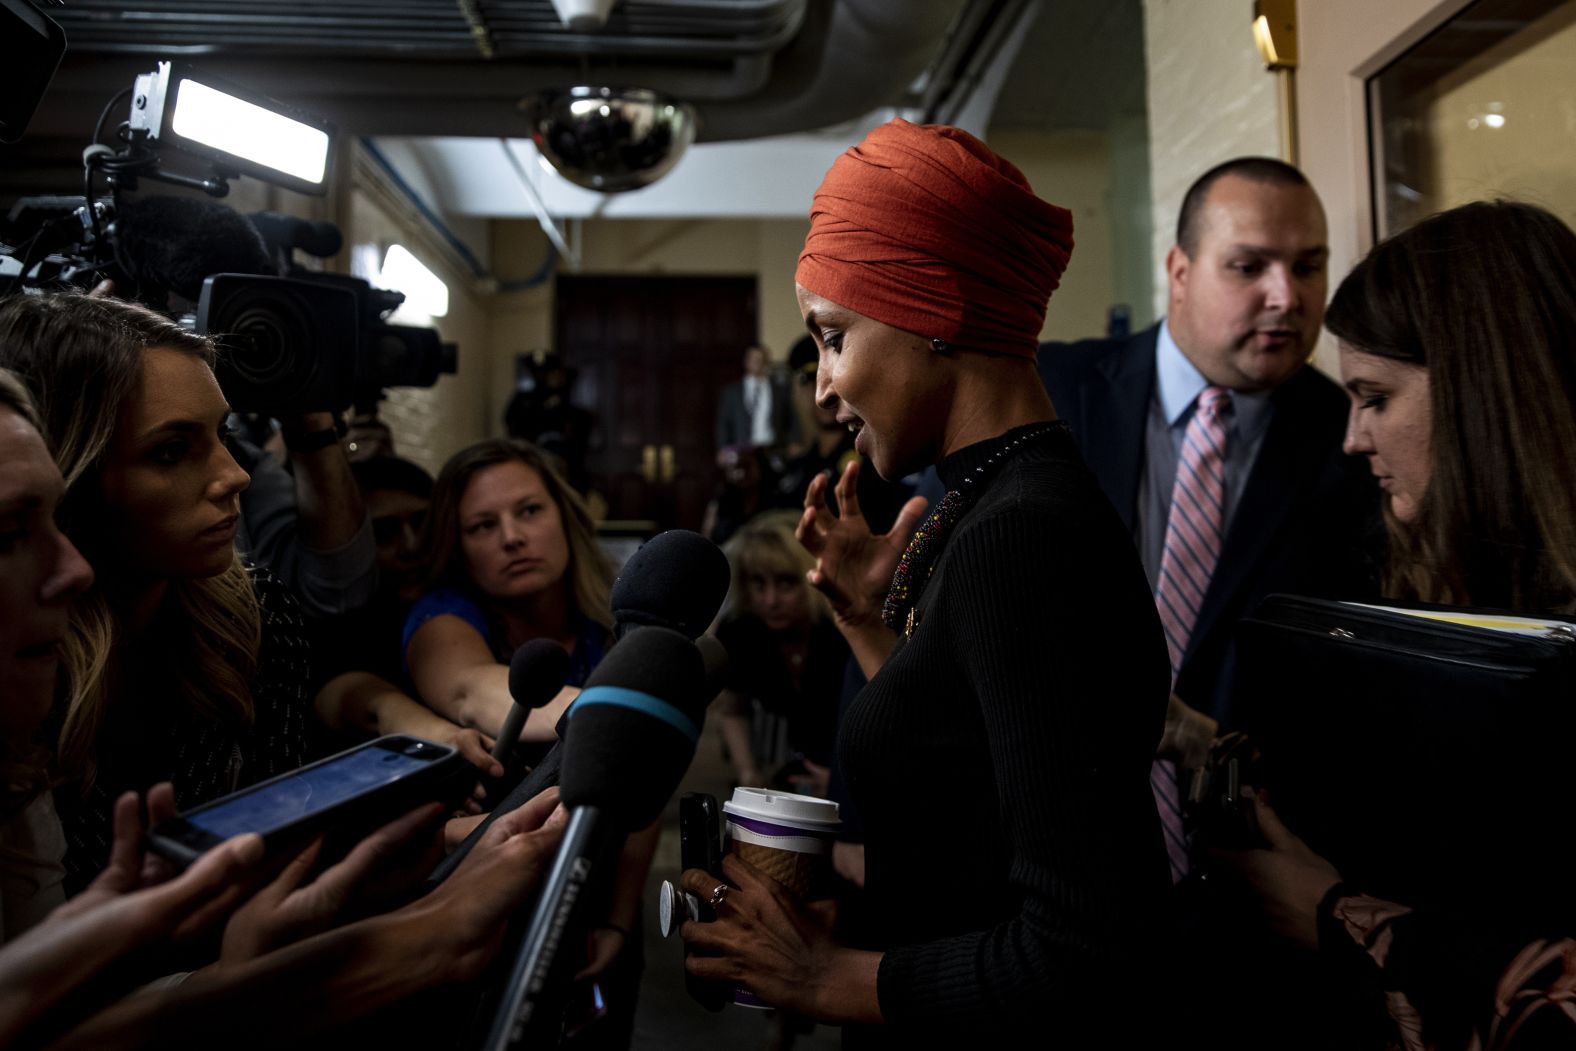 US Rep. Ilhan Omar speaks to reporters on Capitol Hill on September 24. The Democrat from Minnesota <a href="https://www.cnn.com/politics/live-news/trump-ukraine-09-24-2019/h_a99a0c64ec59e8b38c3f43f806e94f32" target="_blank">told CNN</a> that Trump's phone call with Ukraine's president was "the straw that broke the camel's back" for the House deciding to move forward with an impeachment inquiry.